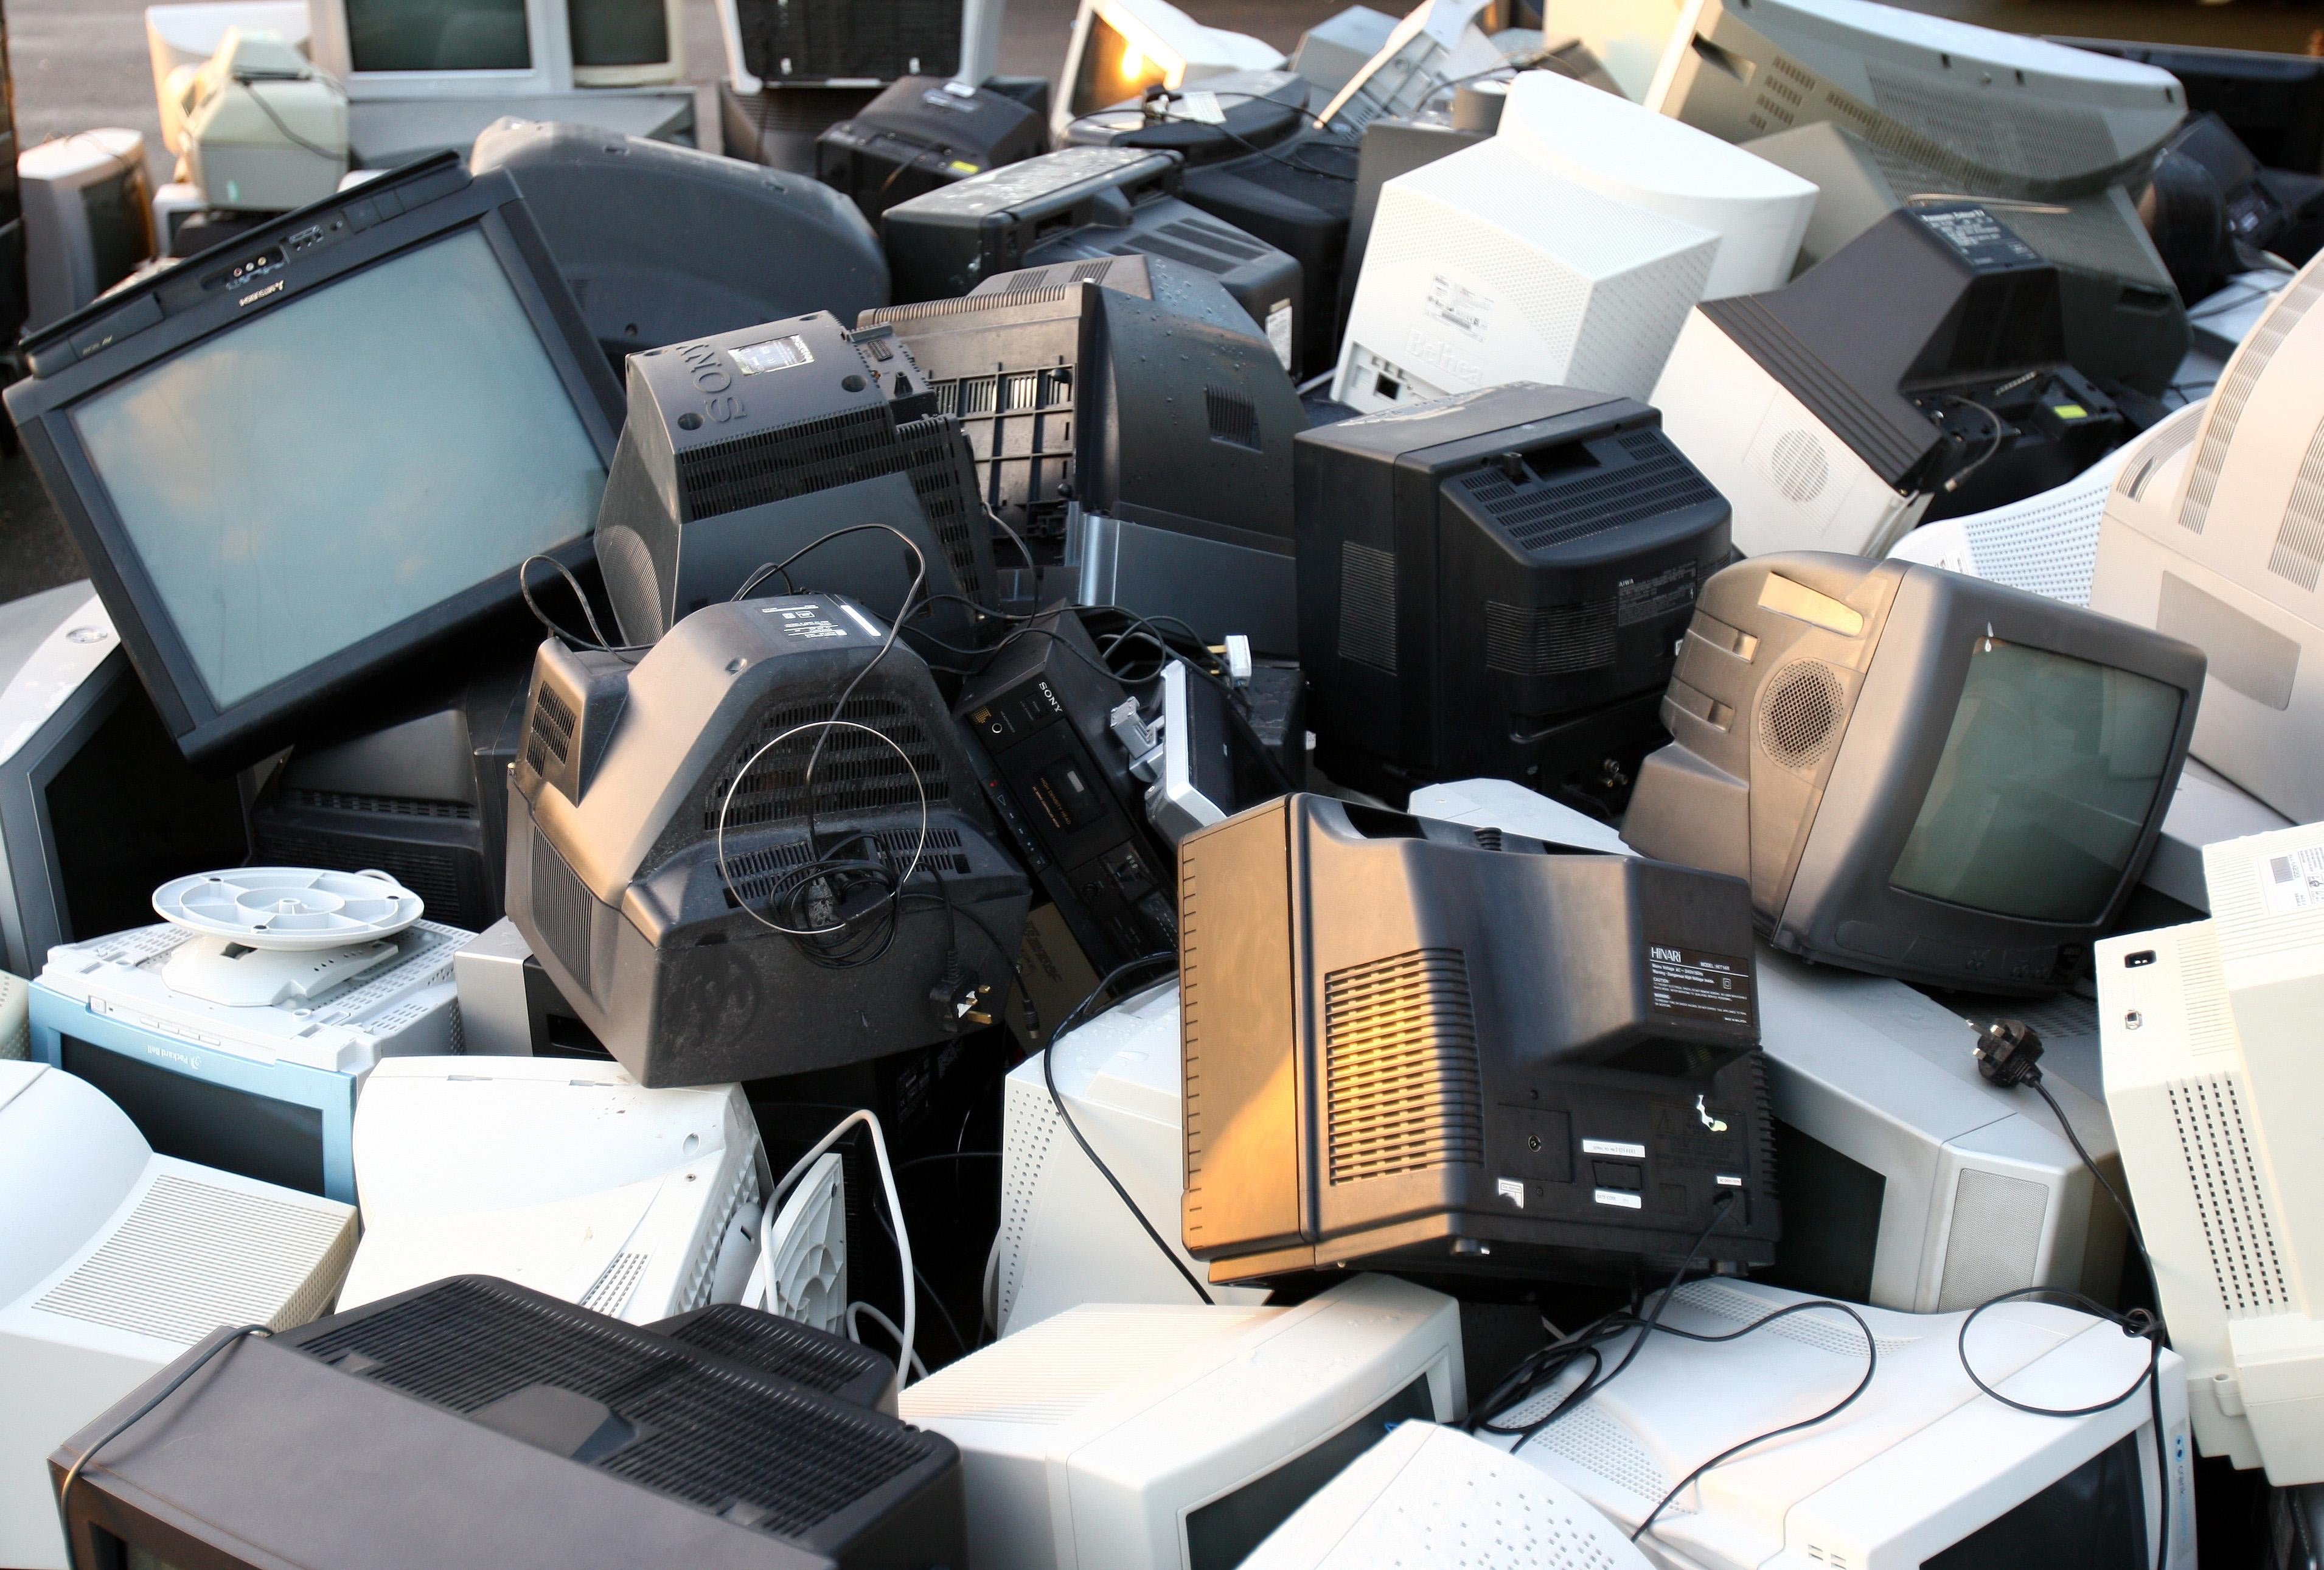 Hinar Hd Video Xxx - Currys launches recycling scheme for old electronic items | The Independent